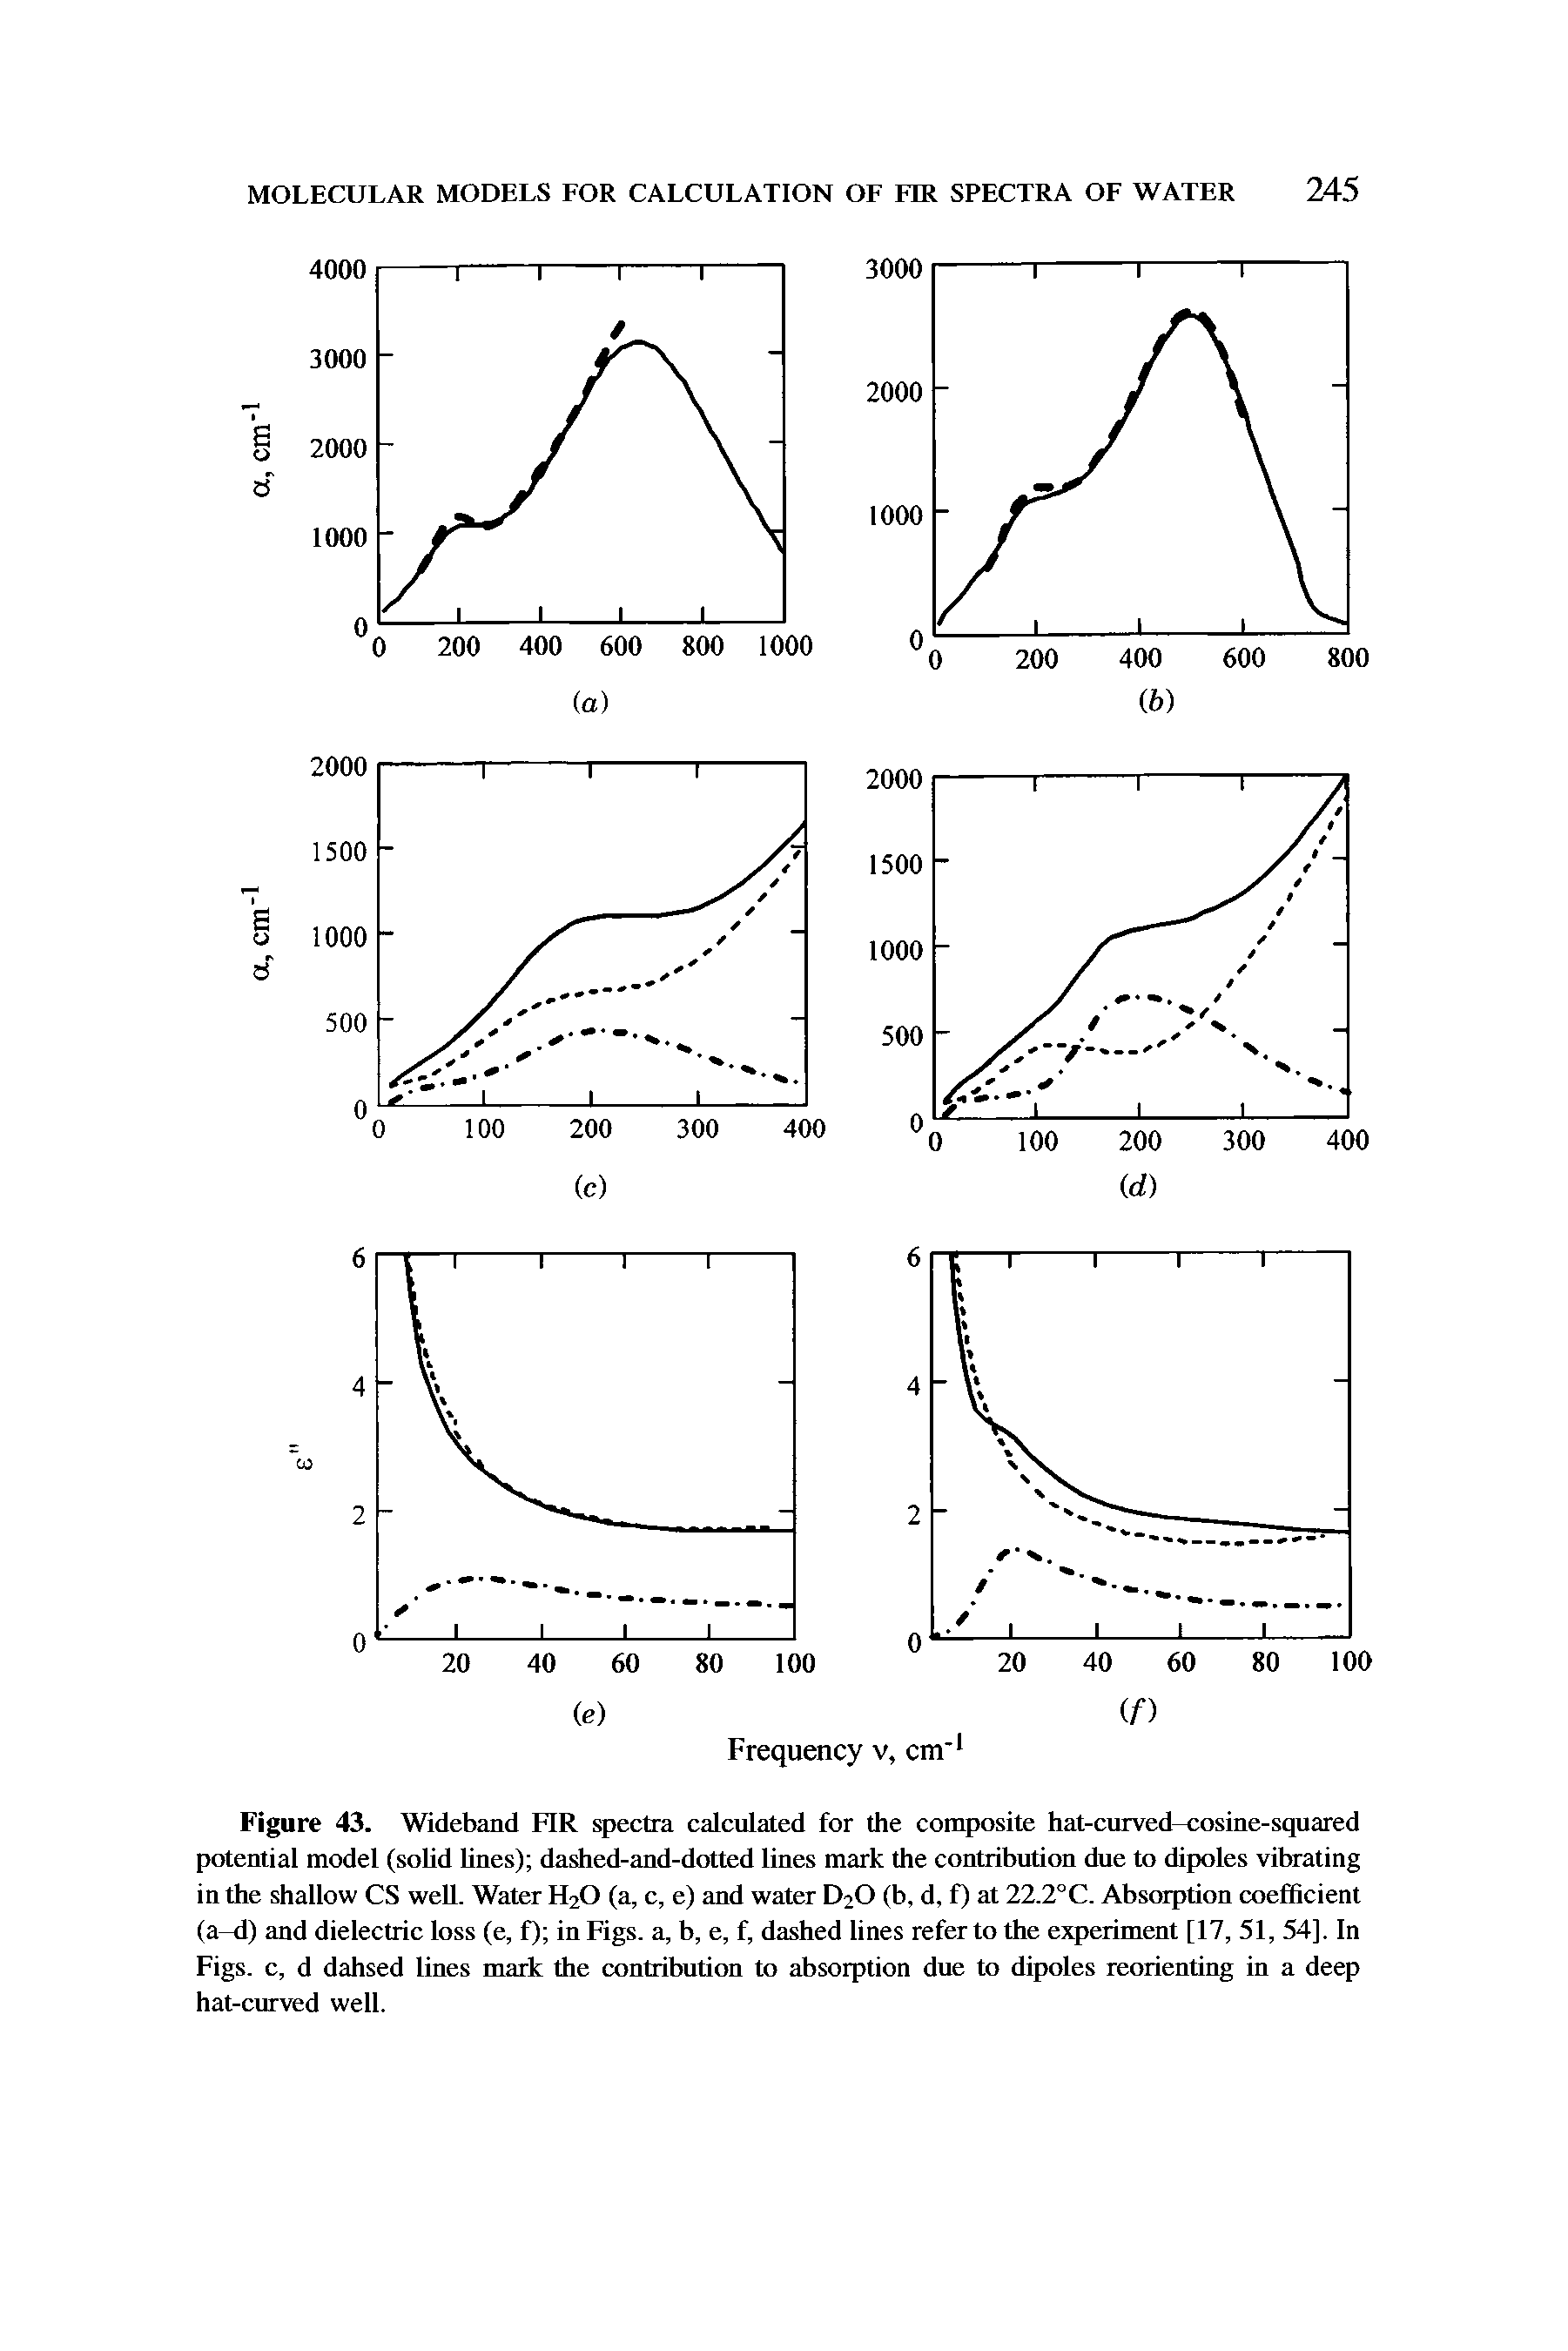 Figure 43. Wideband FIR spectra calculated for the composite hat-curved-cosine-squared potential model (solid lines) dashed-and-dotted lines mark the contribution due to dipoles vibrating in the shallow CS well. Water H20 (a, c, e) and water D20 (b, d, f) at 22.2°C. Absorption coefficient (a-d) and dielectric loss (e, f) in Figs, a, b, e, f, dashed lines refer to the experiment [17, 51, 54]. In Figs, c, d dahsed lines mark the contribution to absorption due to dipoles reorienting in a deep hat-curved well.